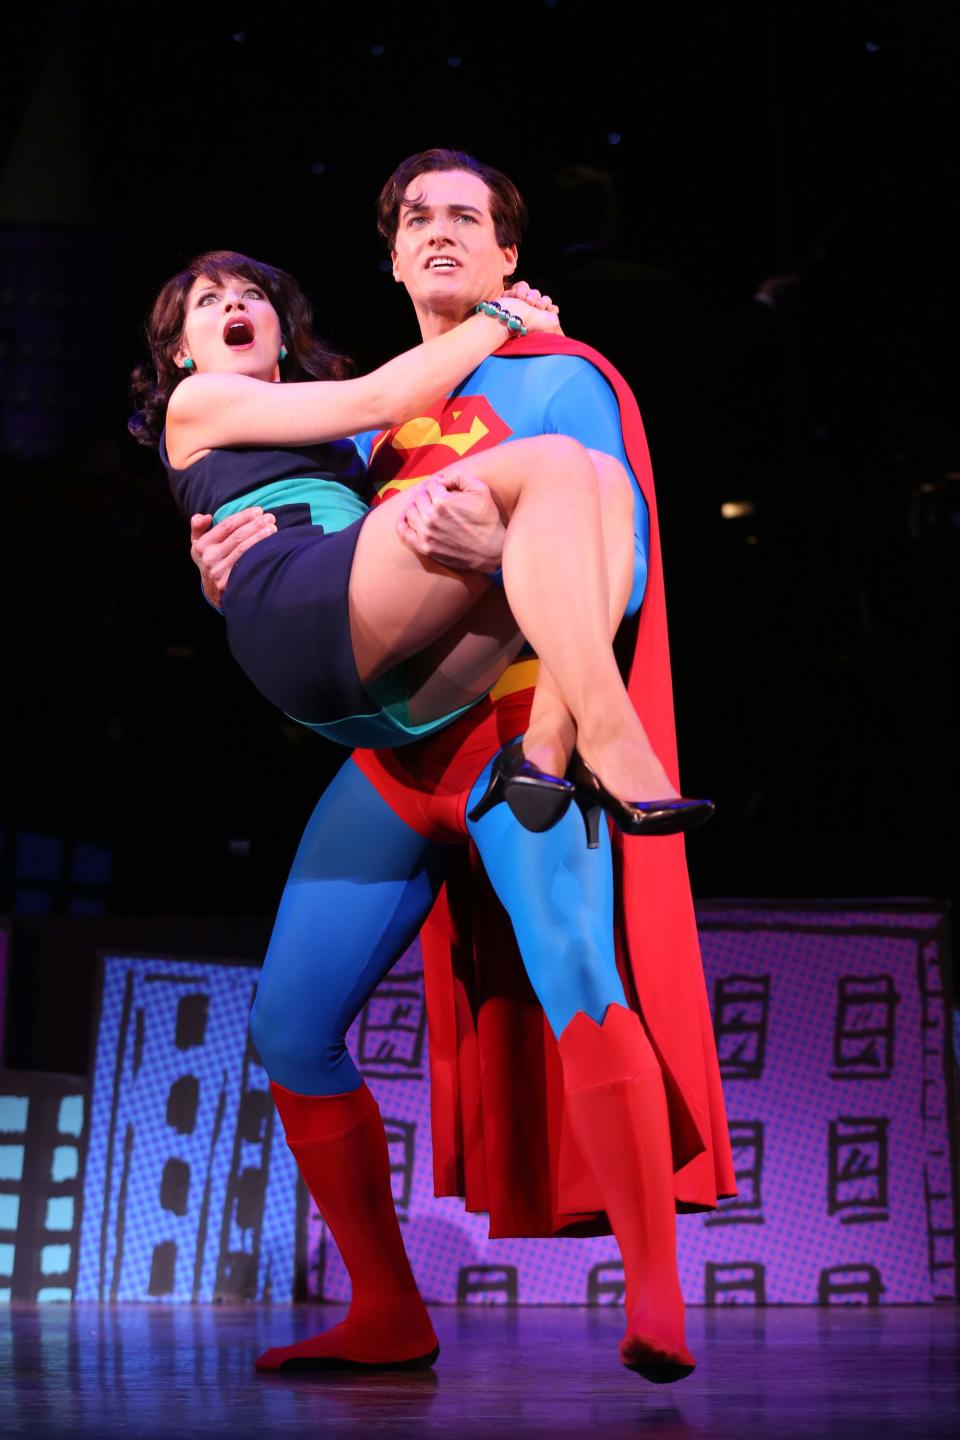 This undated image released by Helene Davis Public Relations shows Jenny Powers as Lois Lane, left, and Edward Watts as Superman in Encore's "It's A Bird It's A Plane It's Superman," performing through March 24 at New York City Center in New York. (AP Photo/Helene Davis Public Relations, Joan Marcus)